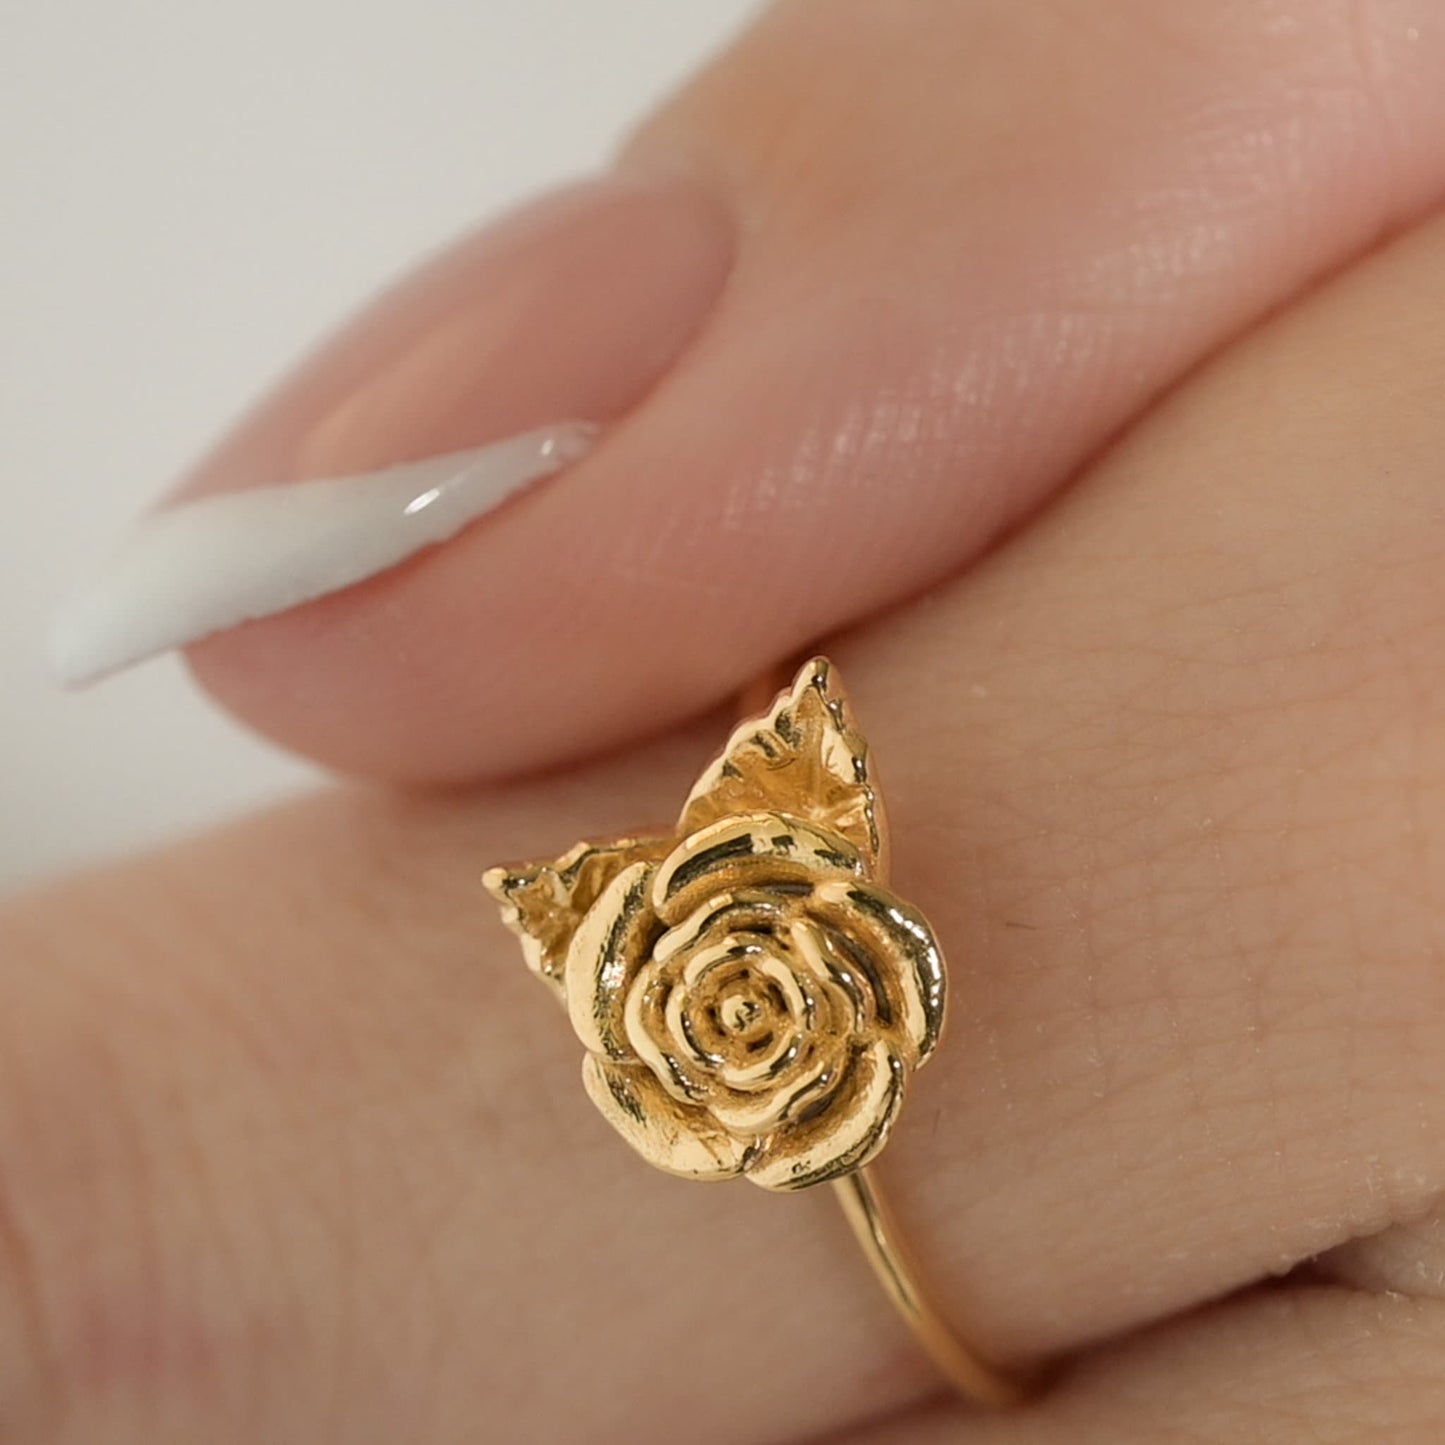 Dainty Rose Flower Ring in Solid 14K Yellow Gold, 14k White Gold, 14K Rose Gold